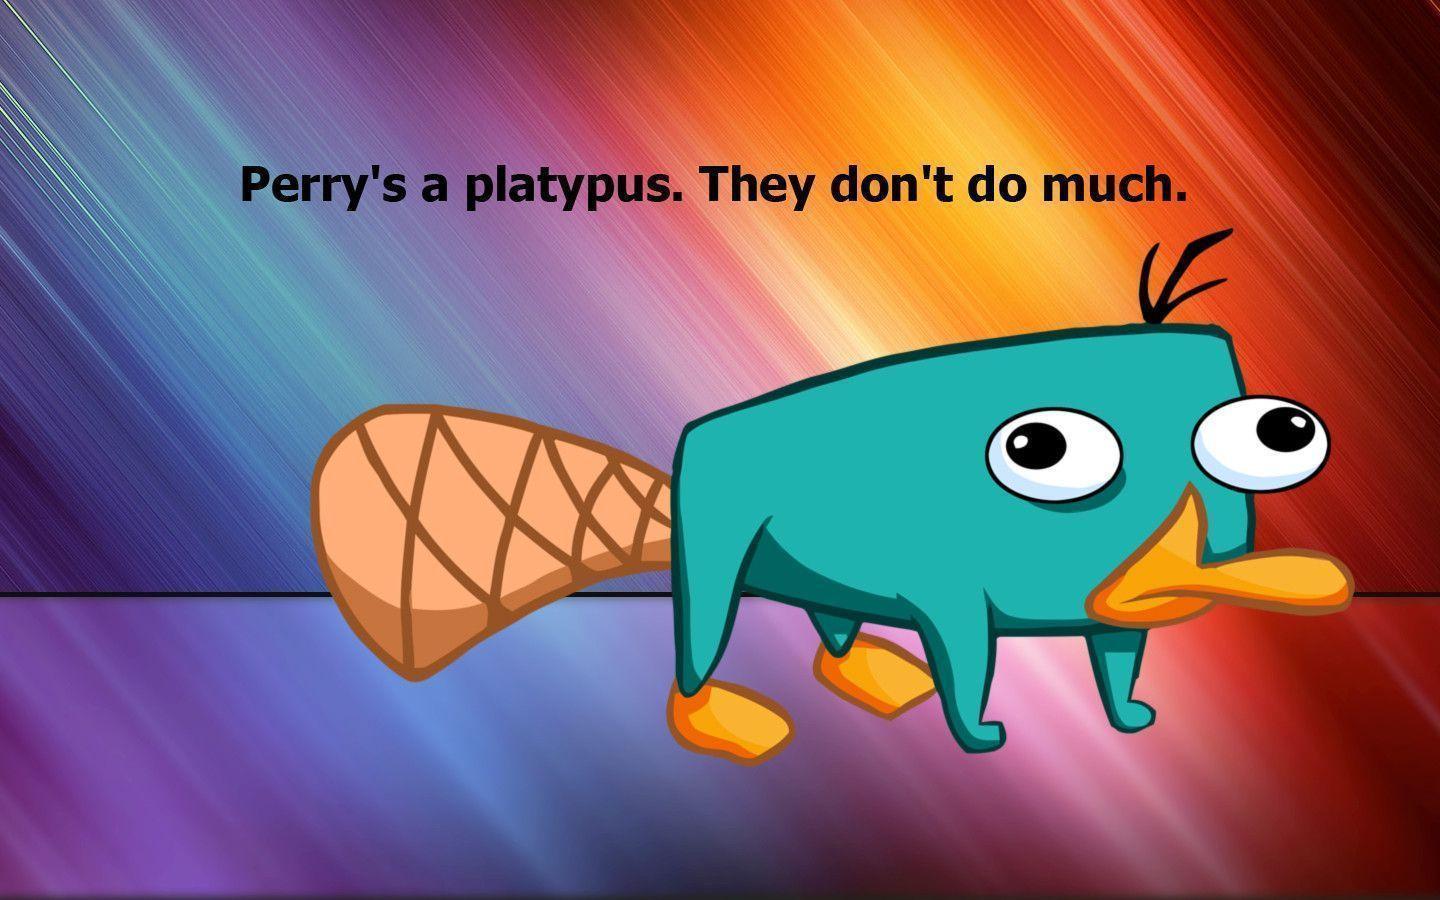 Perry The Platypus Image 21 1080p